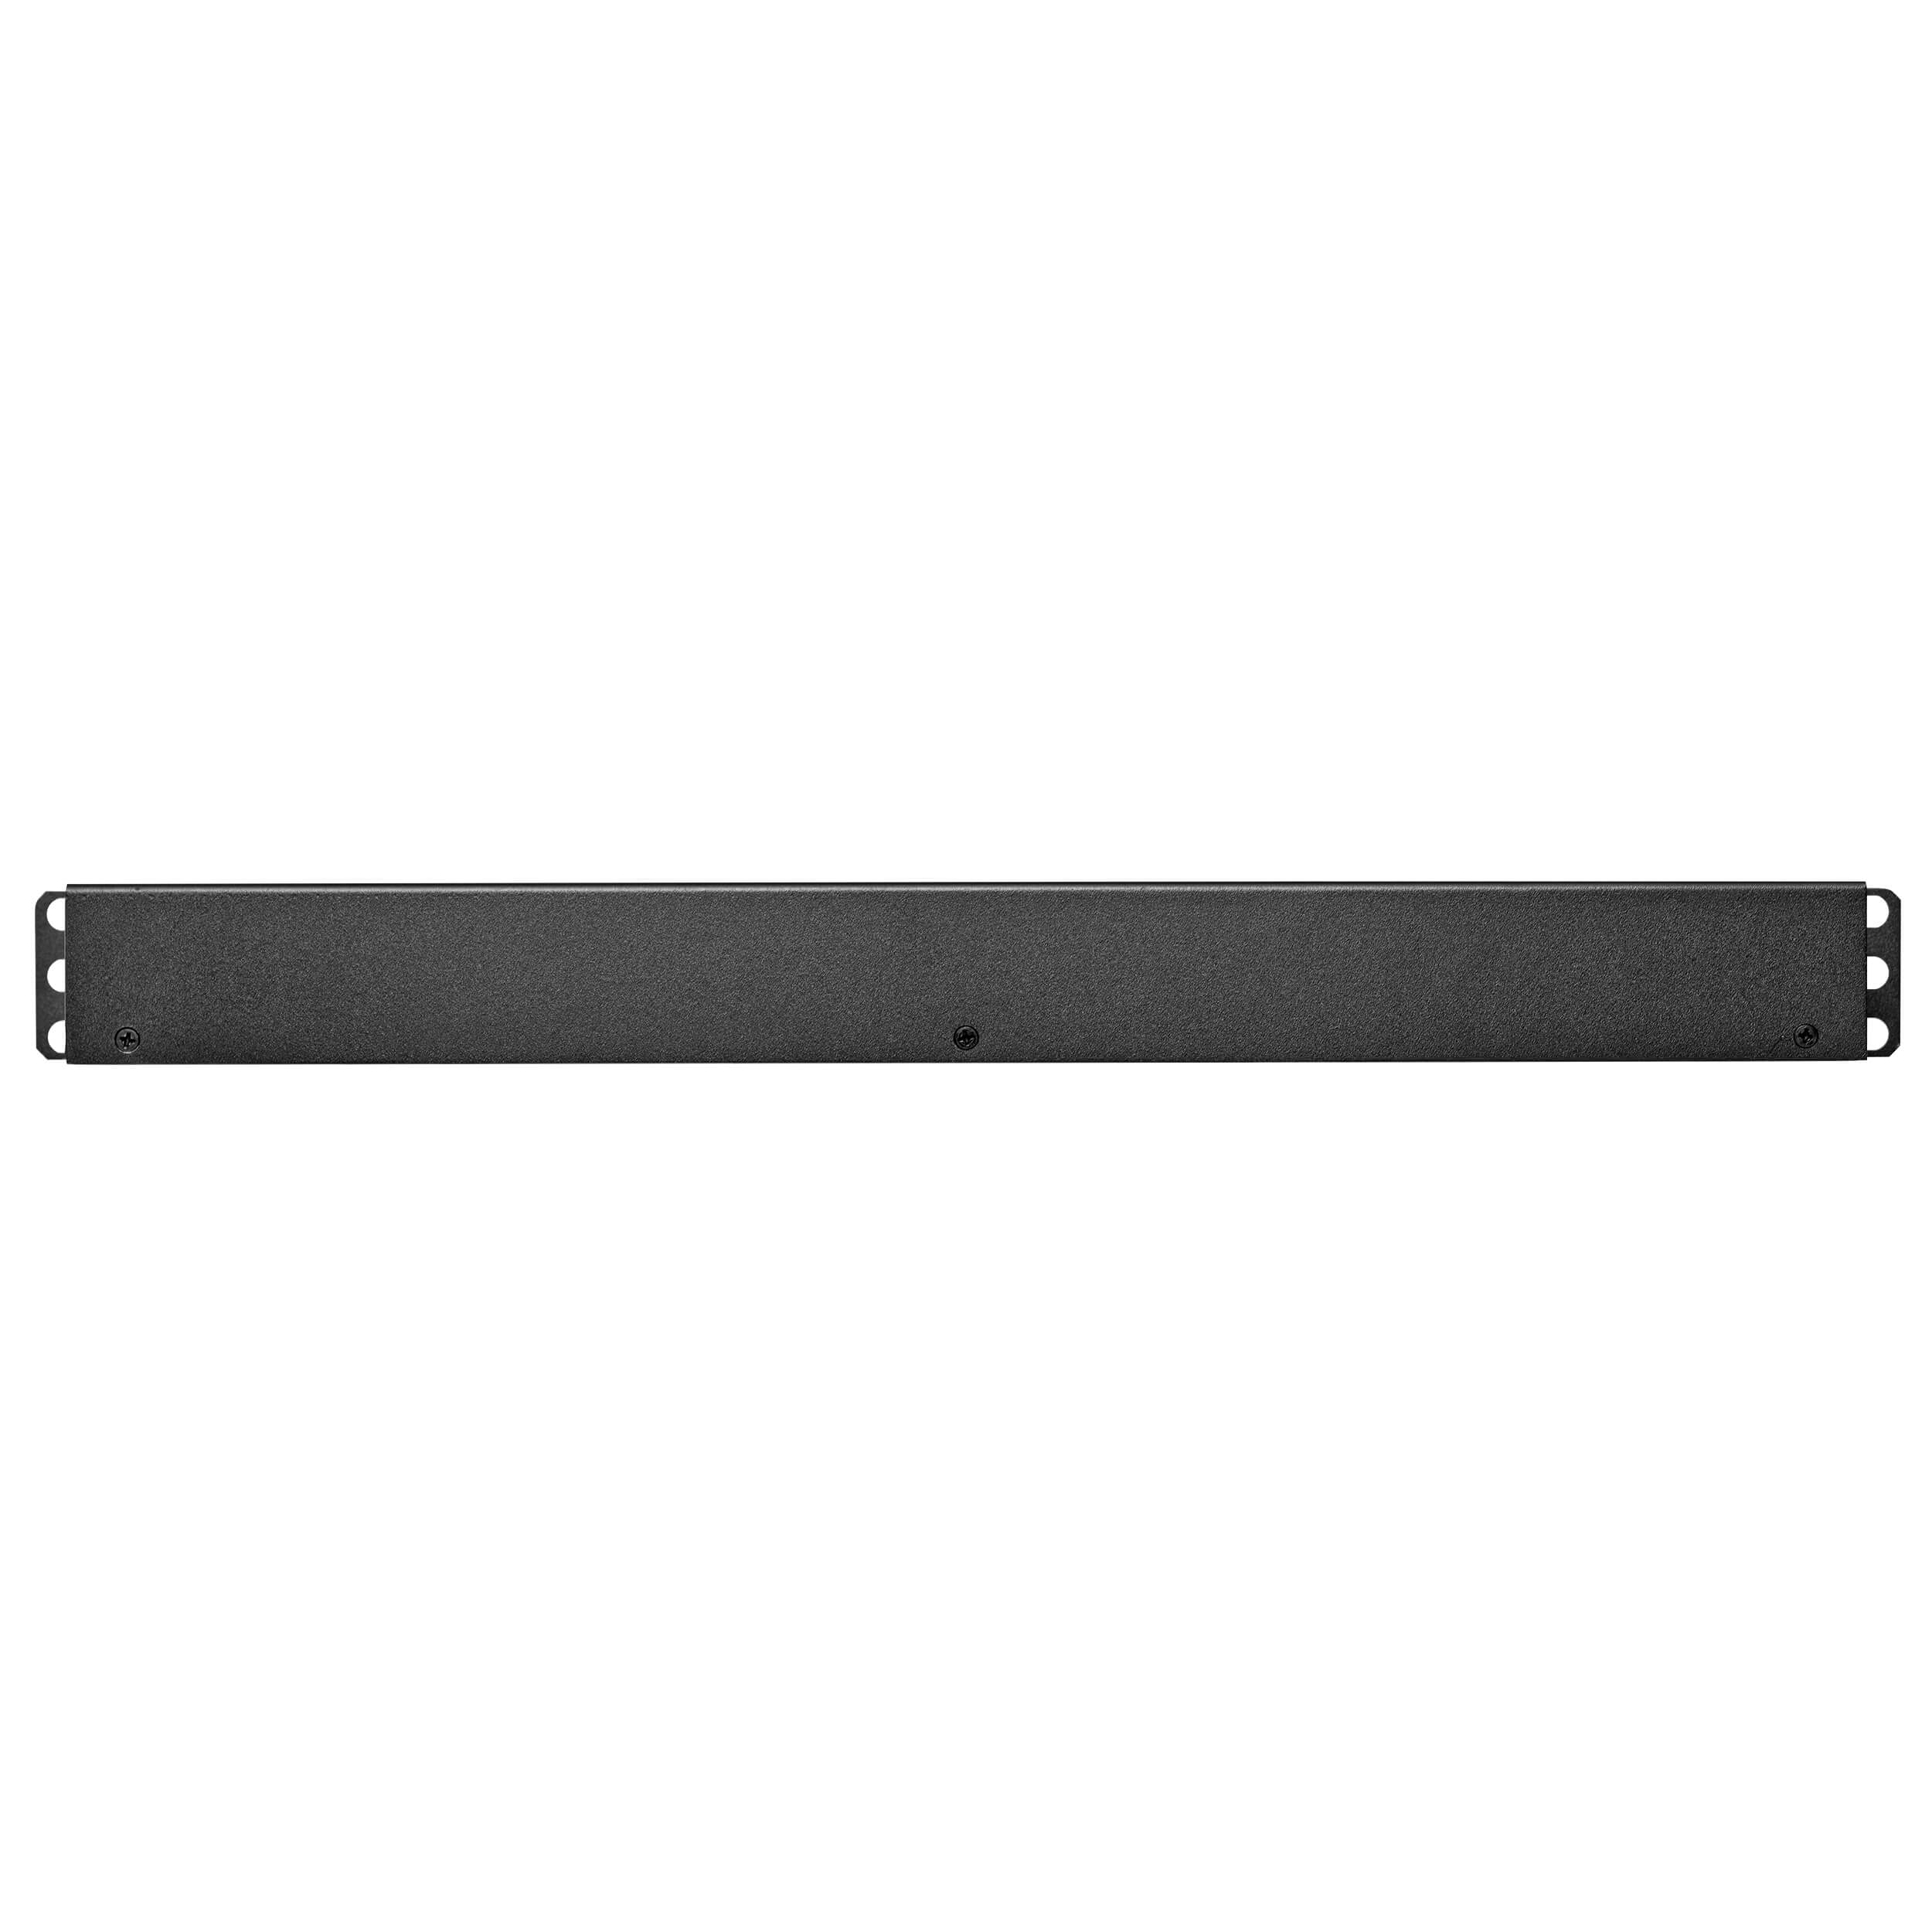 Single-Phase Hot-Swap PDU, C13, C19 Outlets, C20 Inlets, 1U Rack or ...